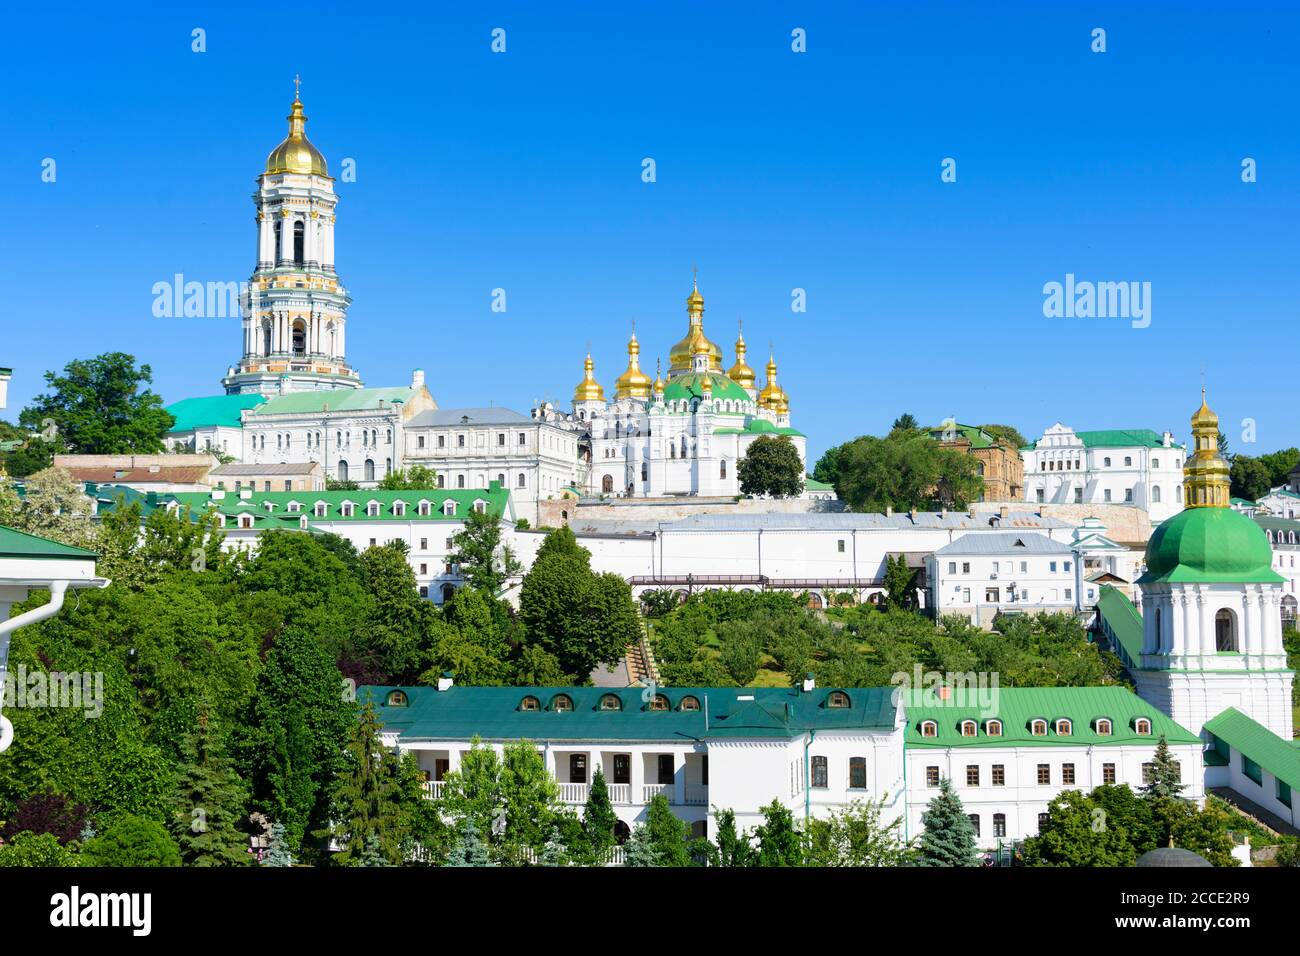 Kiev (Kyiv), Great Lavra Belltower, Dormition Cathedral (right), at Pechersk Lavra (Monastery of the Caves), historic Orthodox Christian monastery in Stock Photo